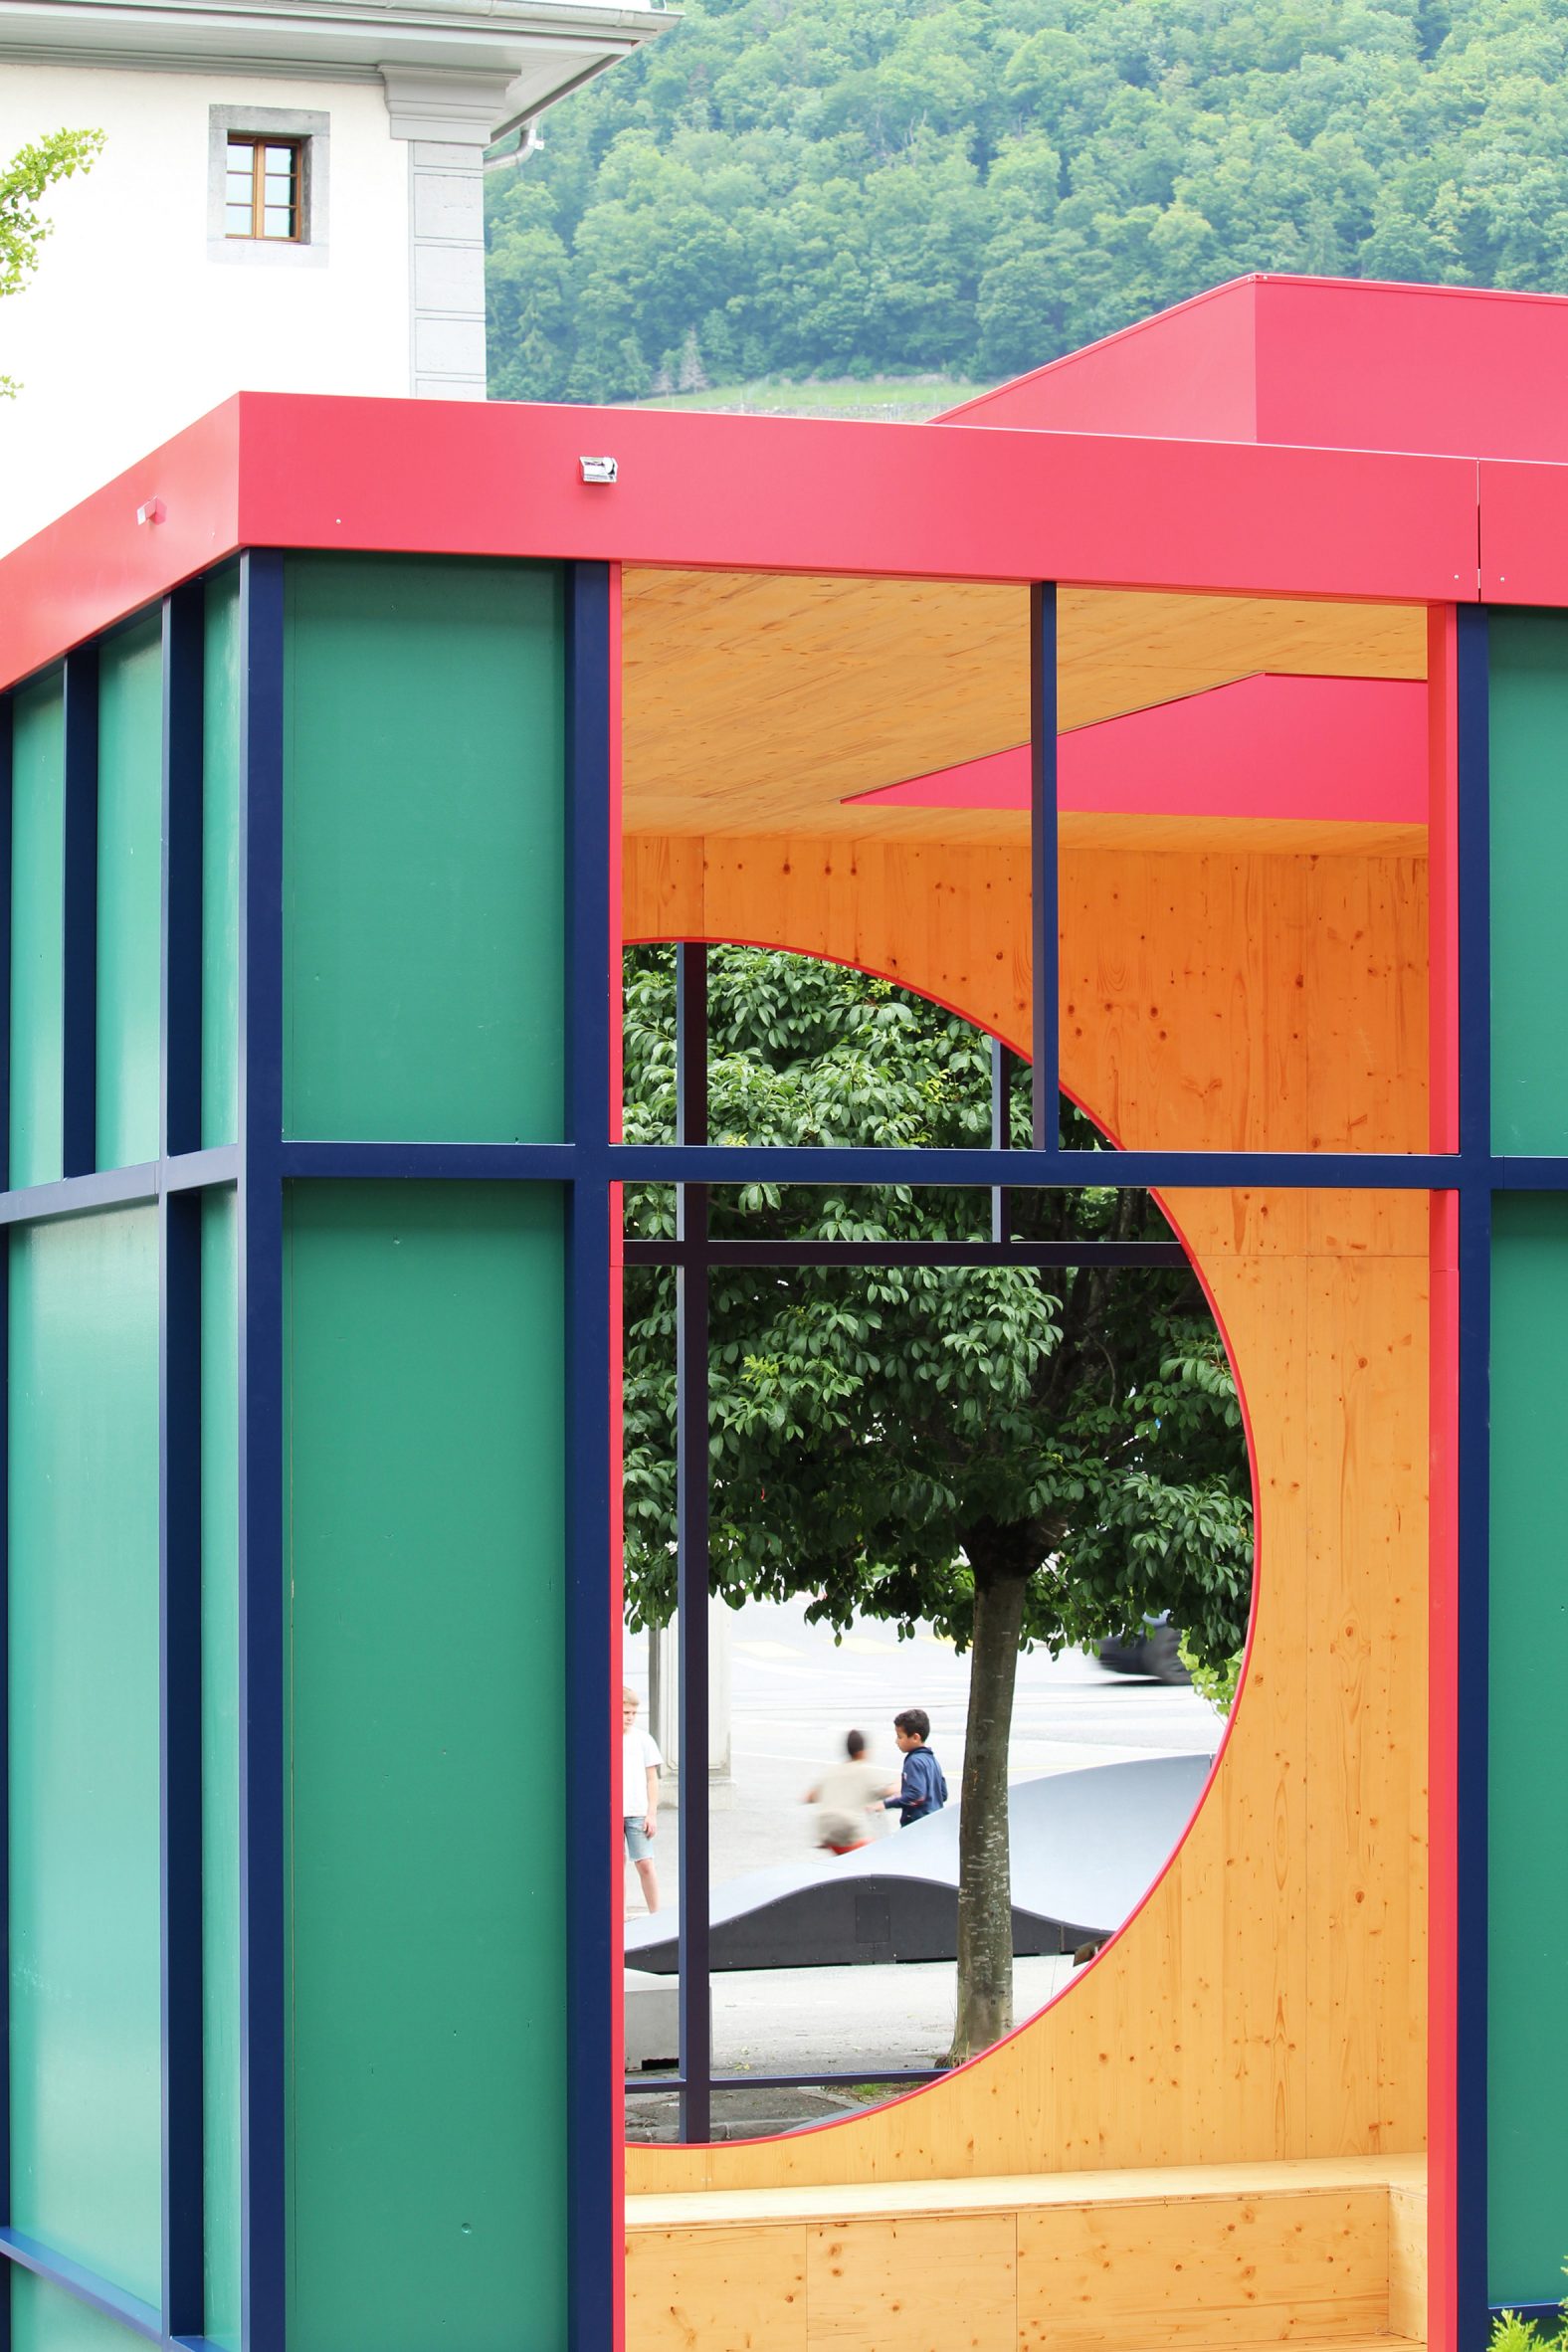 A pavilions clad in primary colours